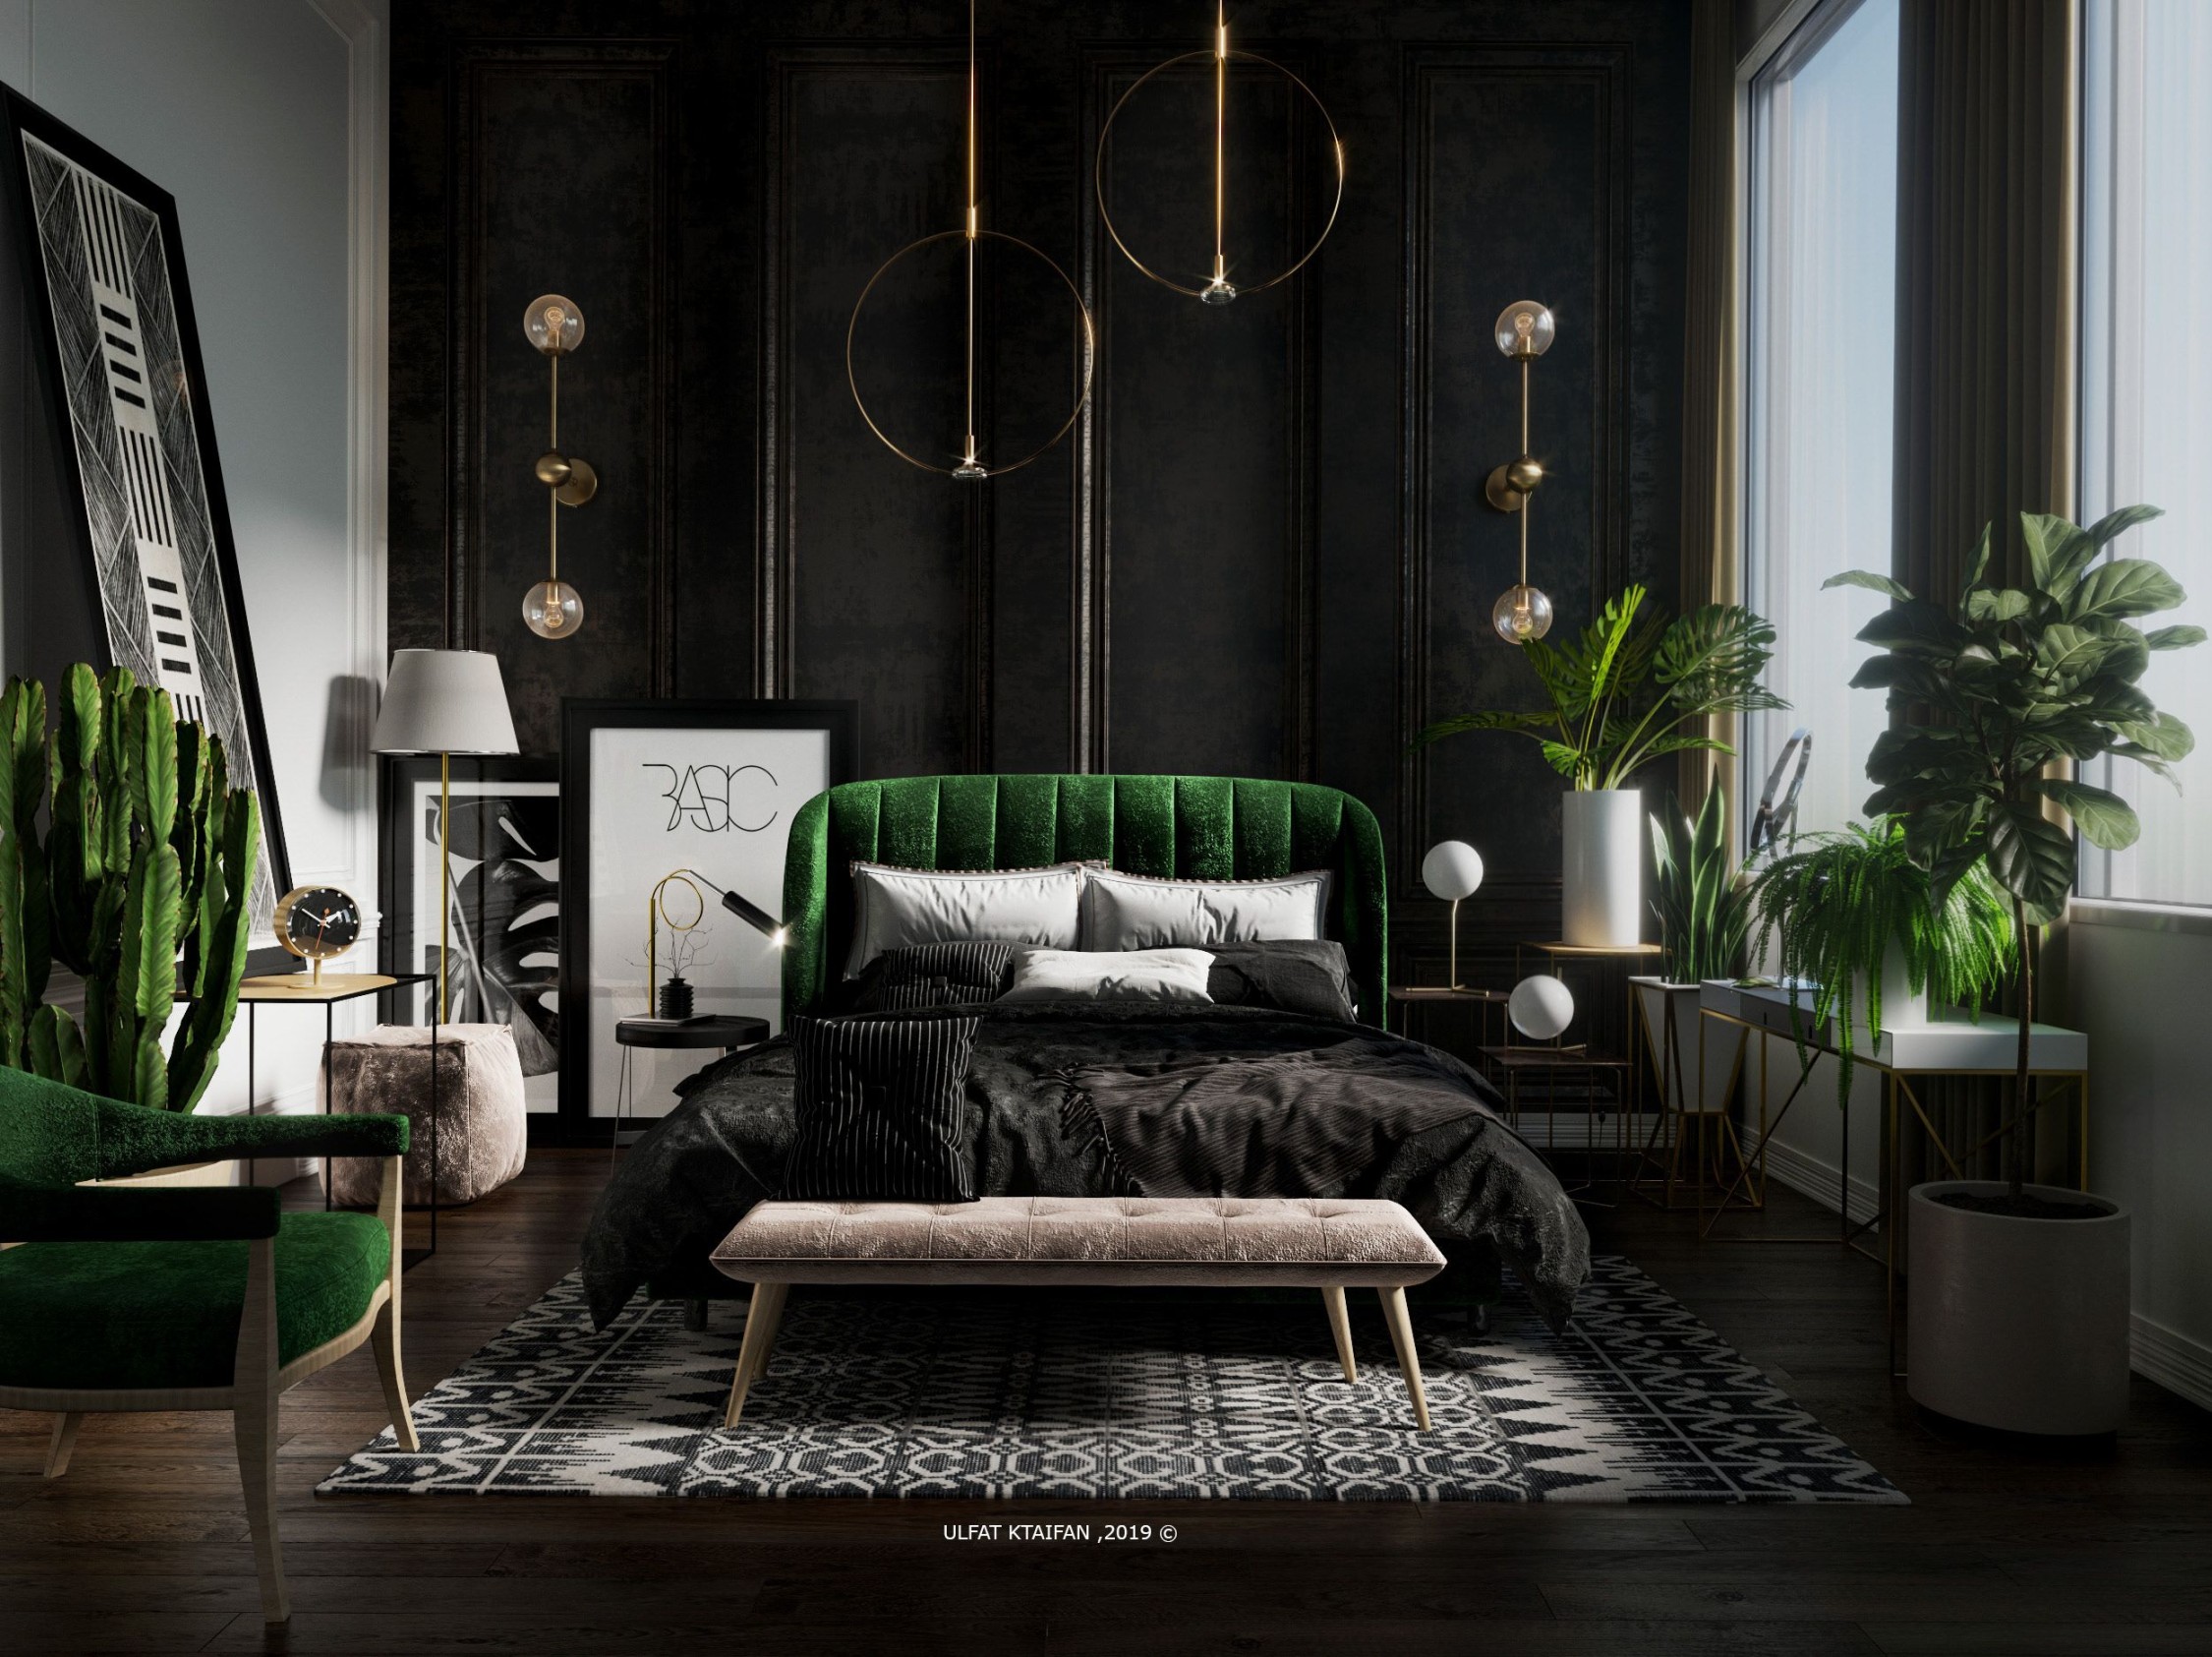 Check out my @Behance project: "green bedroom" urban jungle